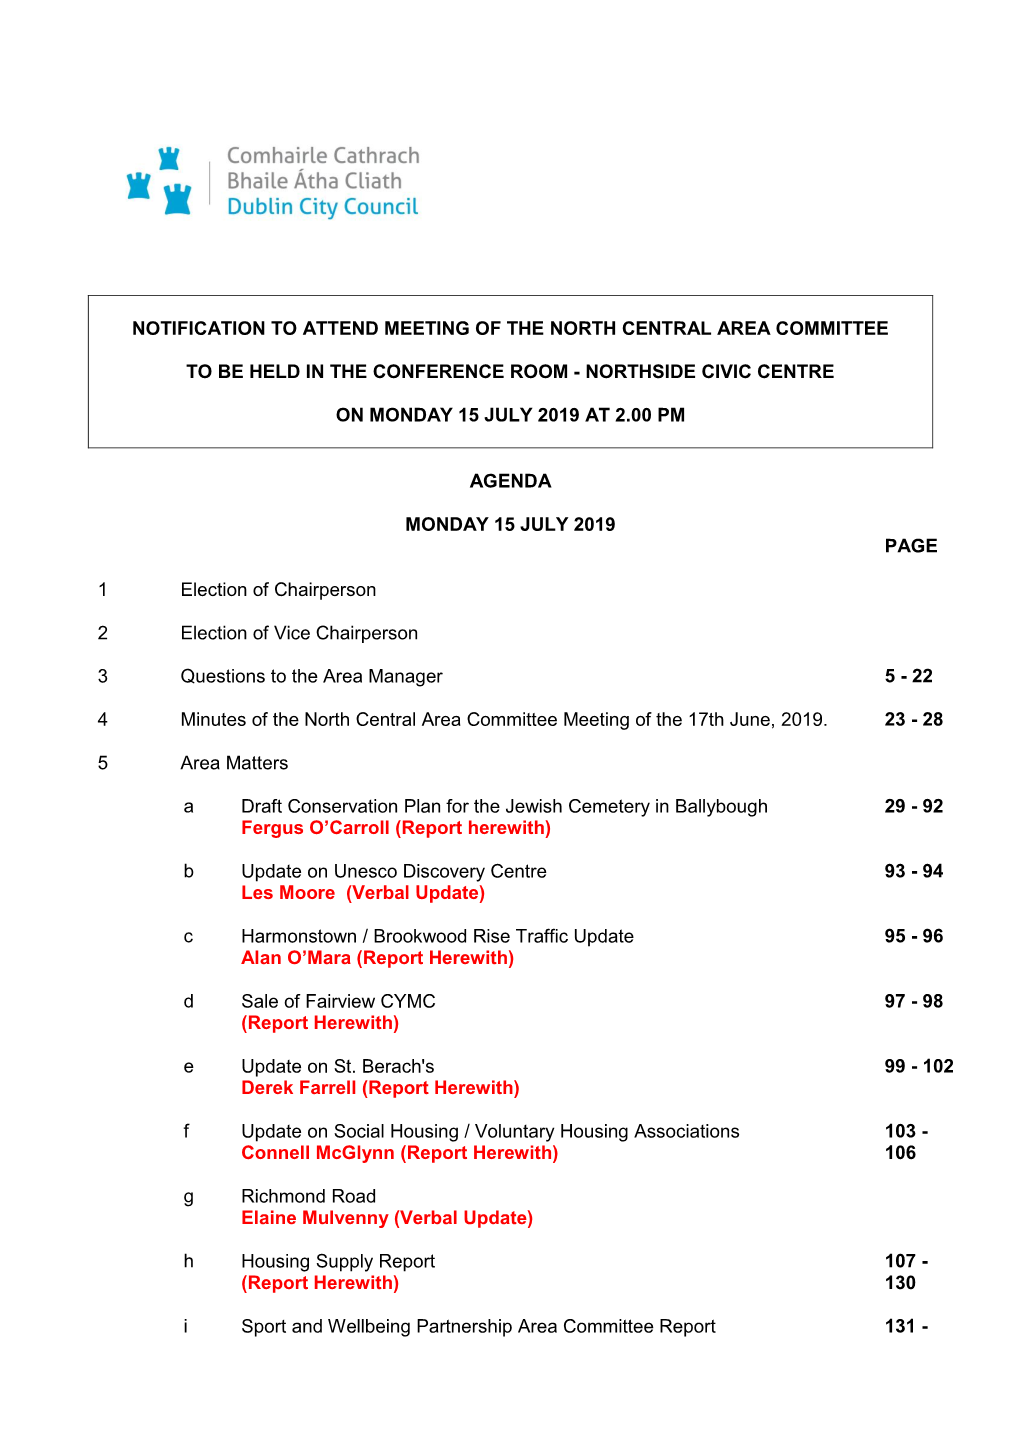 (Public Pack)Agenda Document for North Central Area Committee, 15